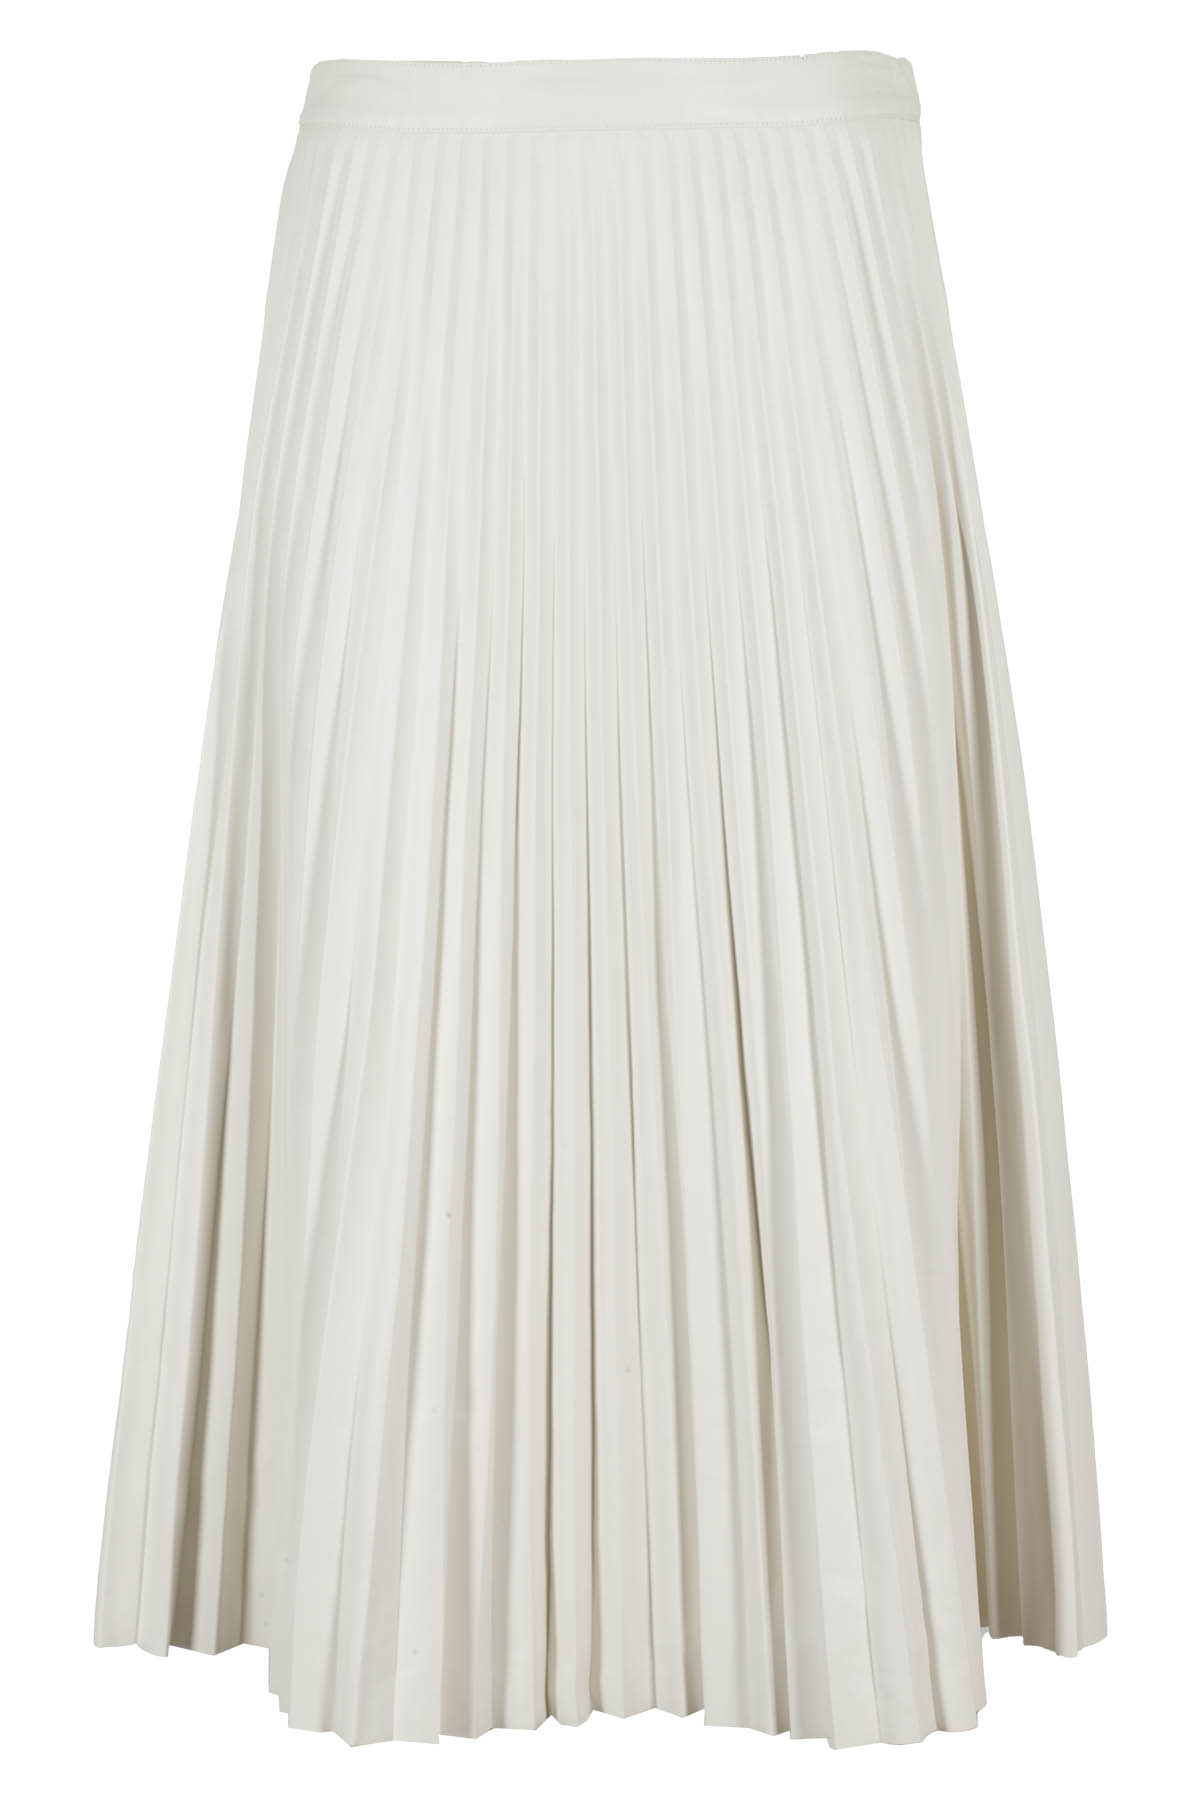 PROENZA SCHOULER WHITE LABEL FAUX LEATHER PLEATED